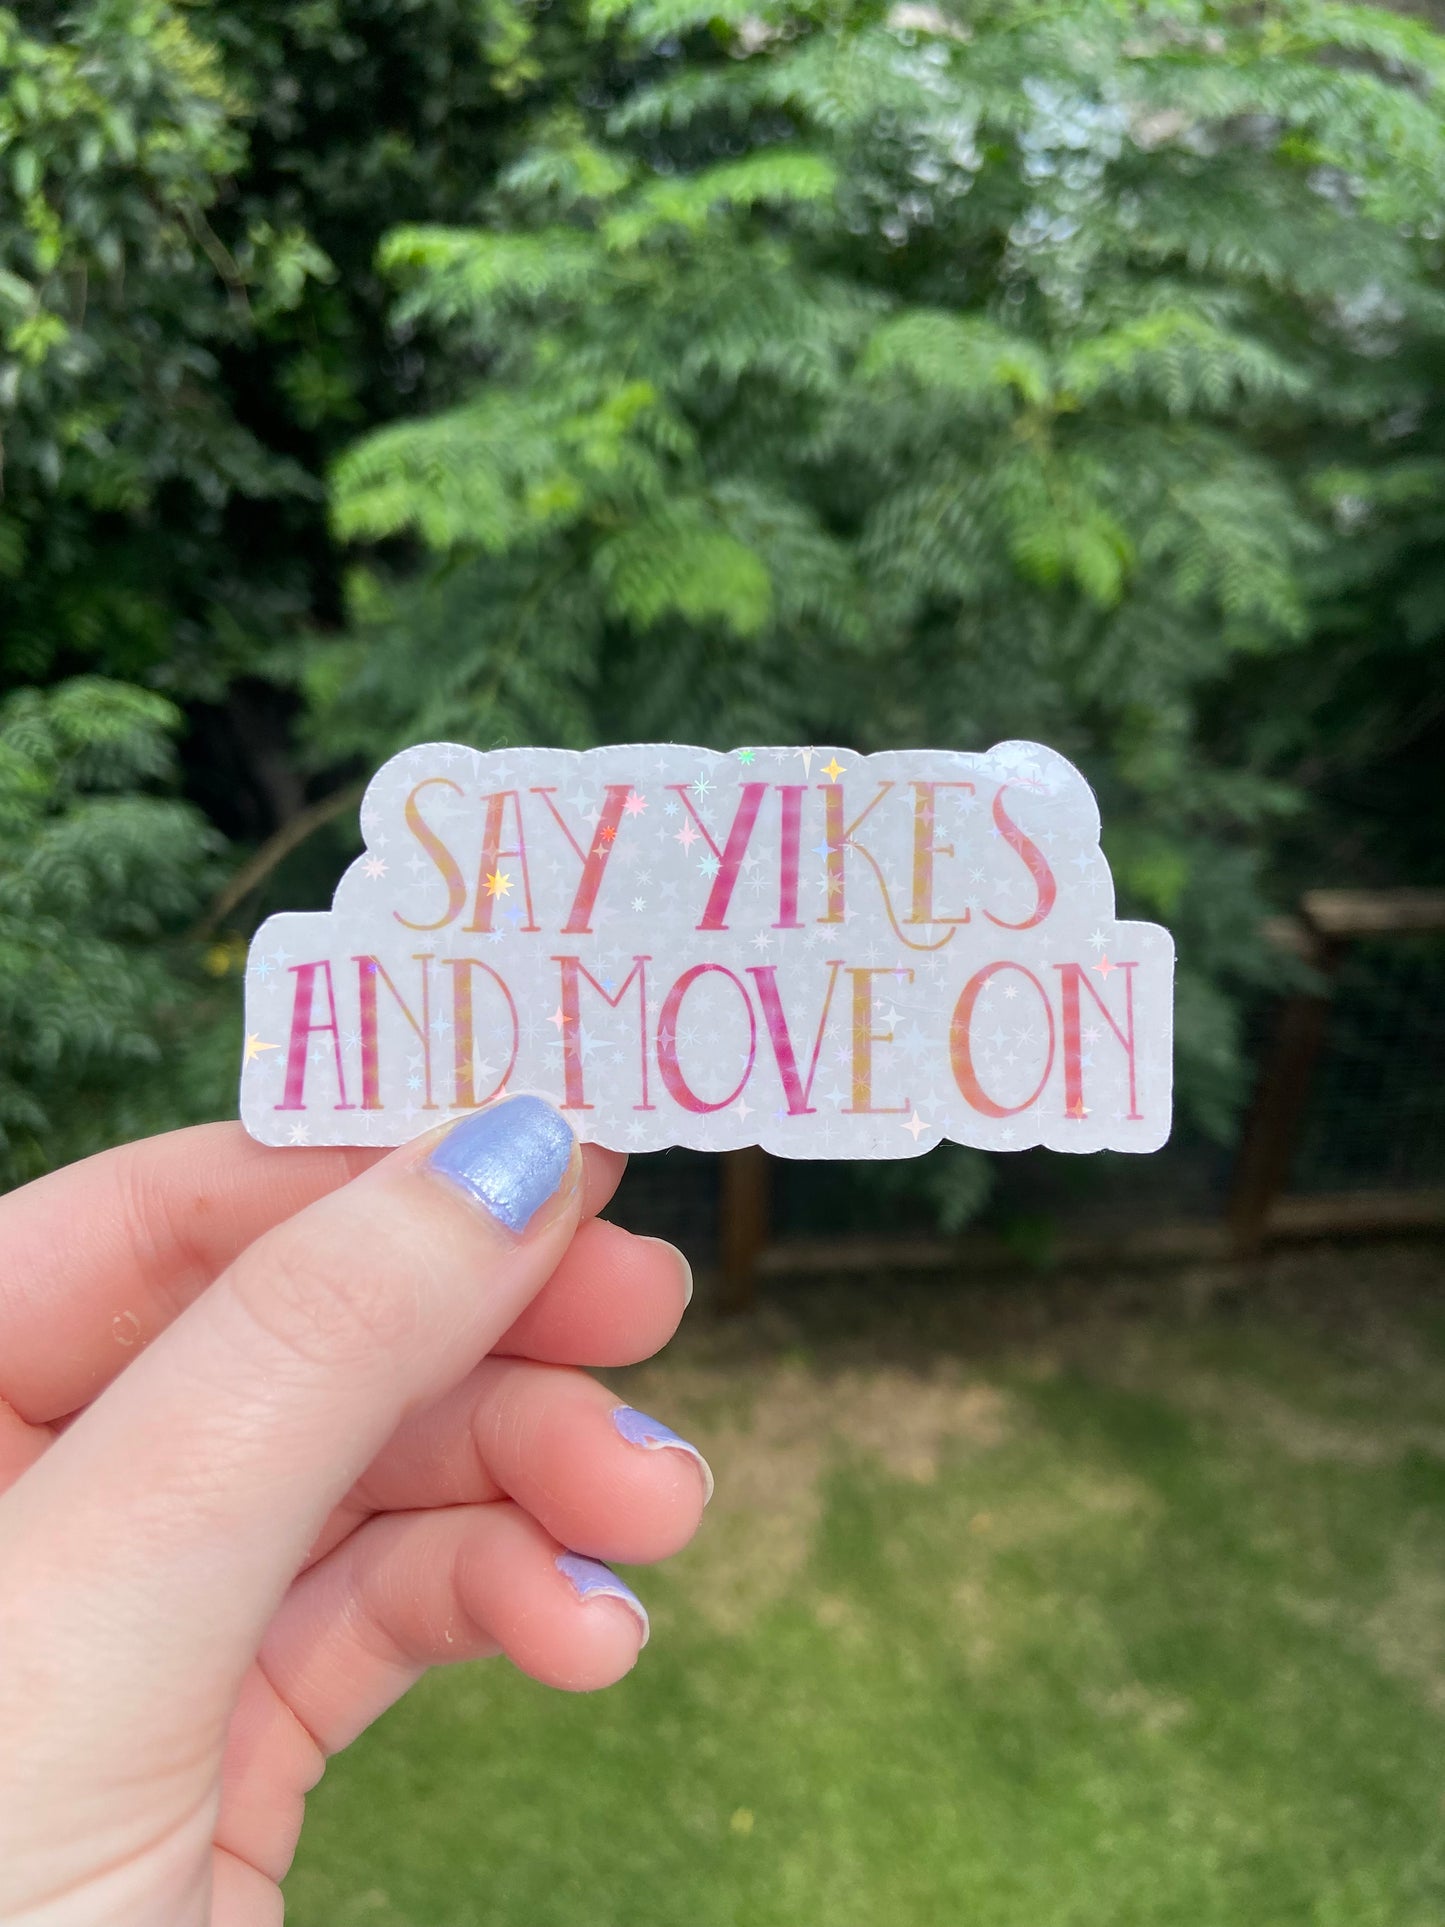 "Say yikes and move on" Sticker